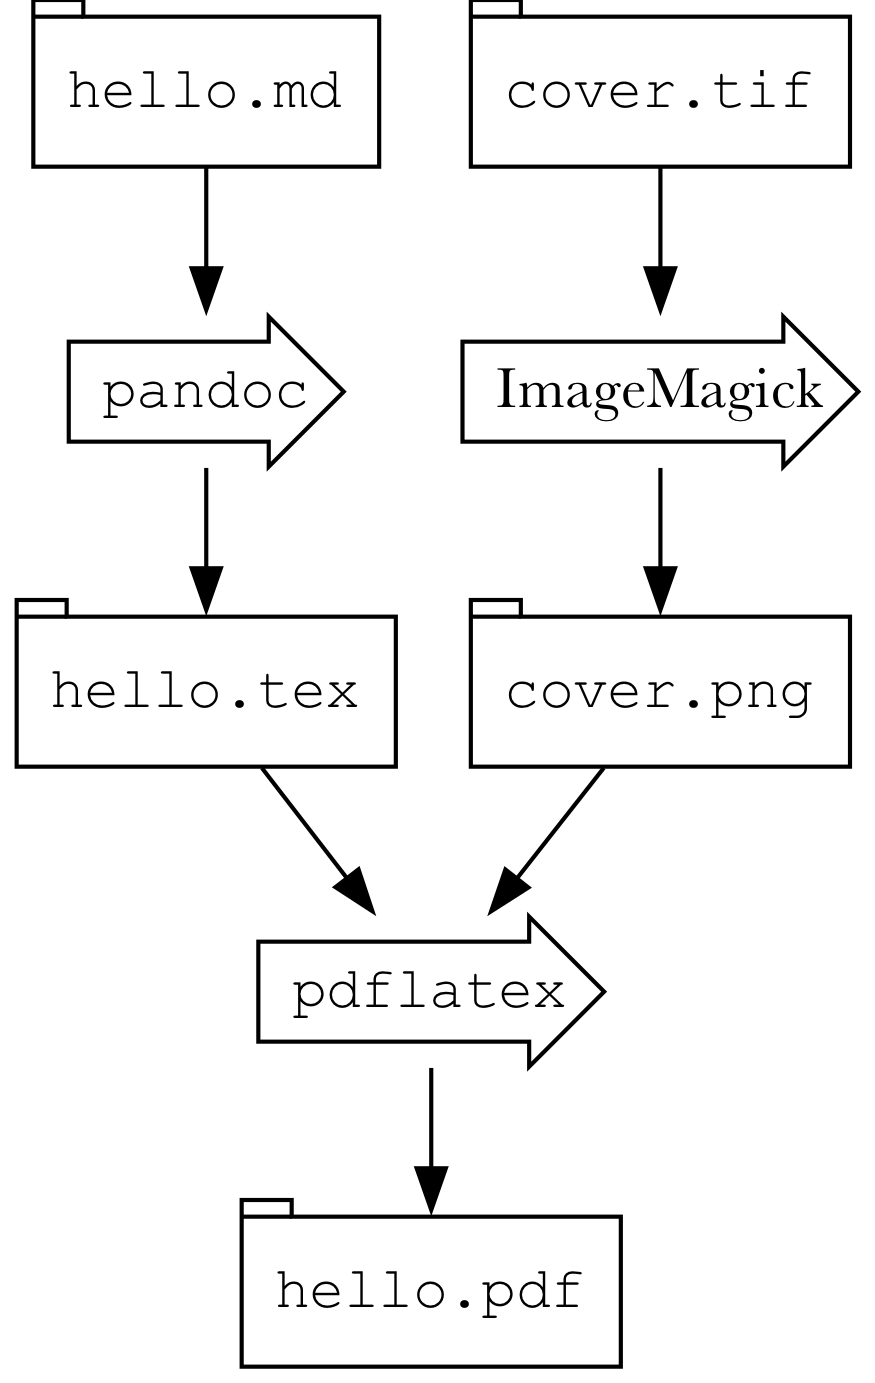 Visual representation of the dependencies between the files and the commands that produce them